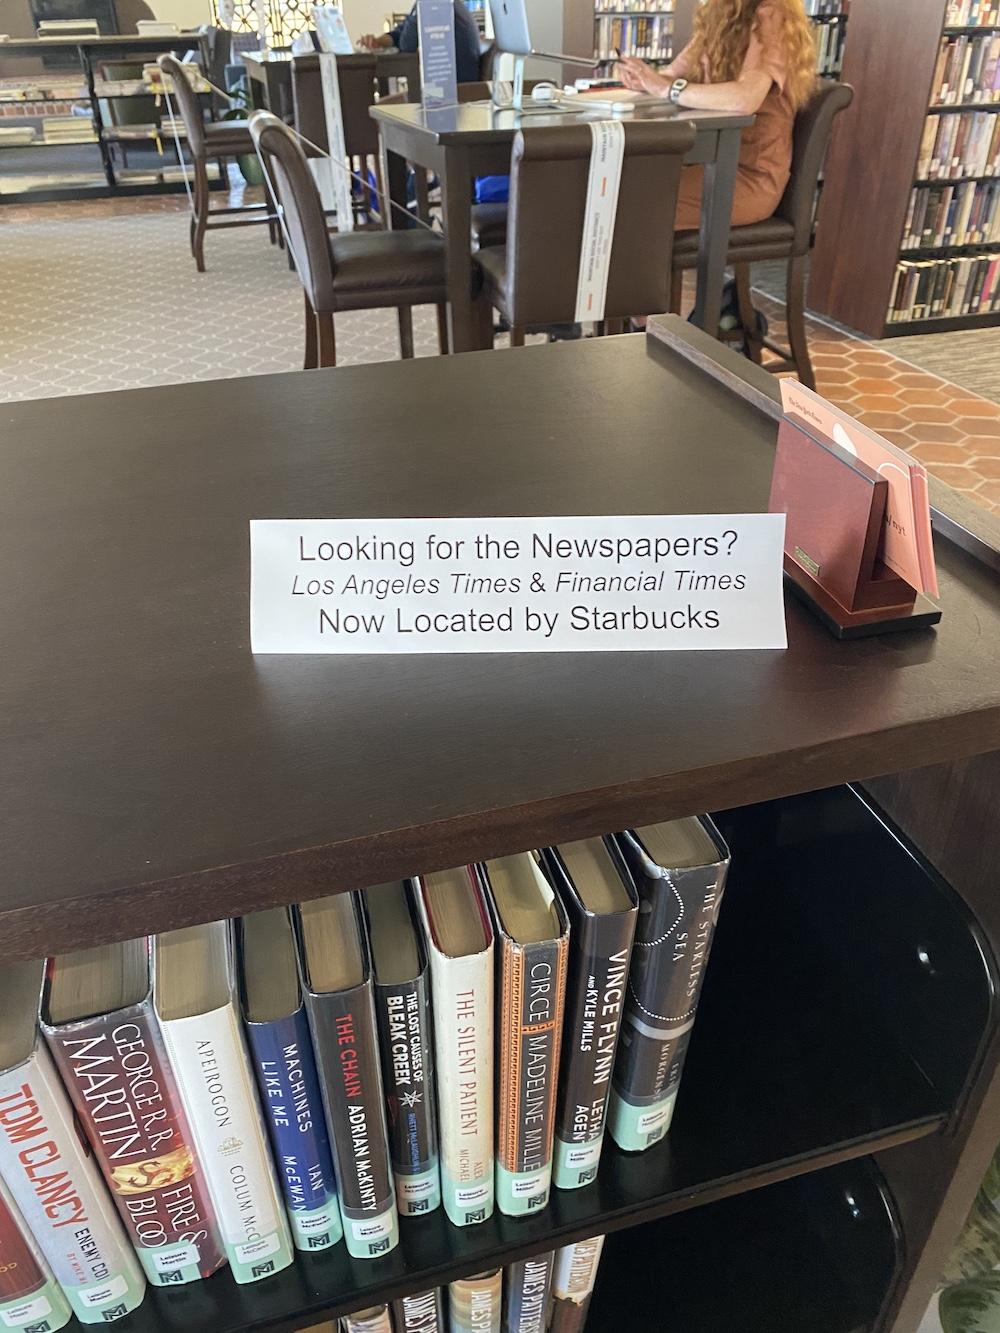 Pepperdine libraries are trying to both following regulations, and allow students to use the library efficiently March 15. Staff at the library have arranged the facility in ways that reduce crowding and encourage social distancing.